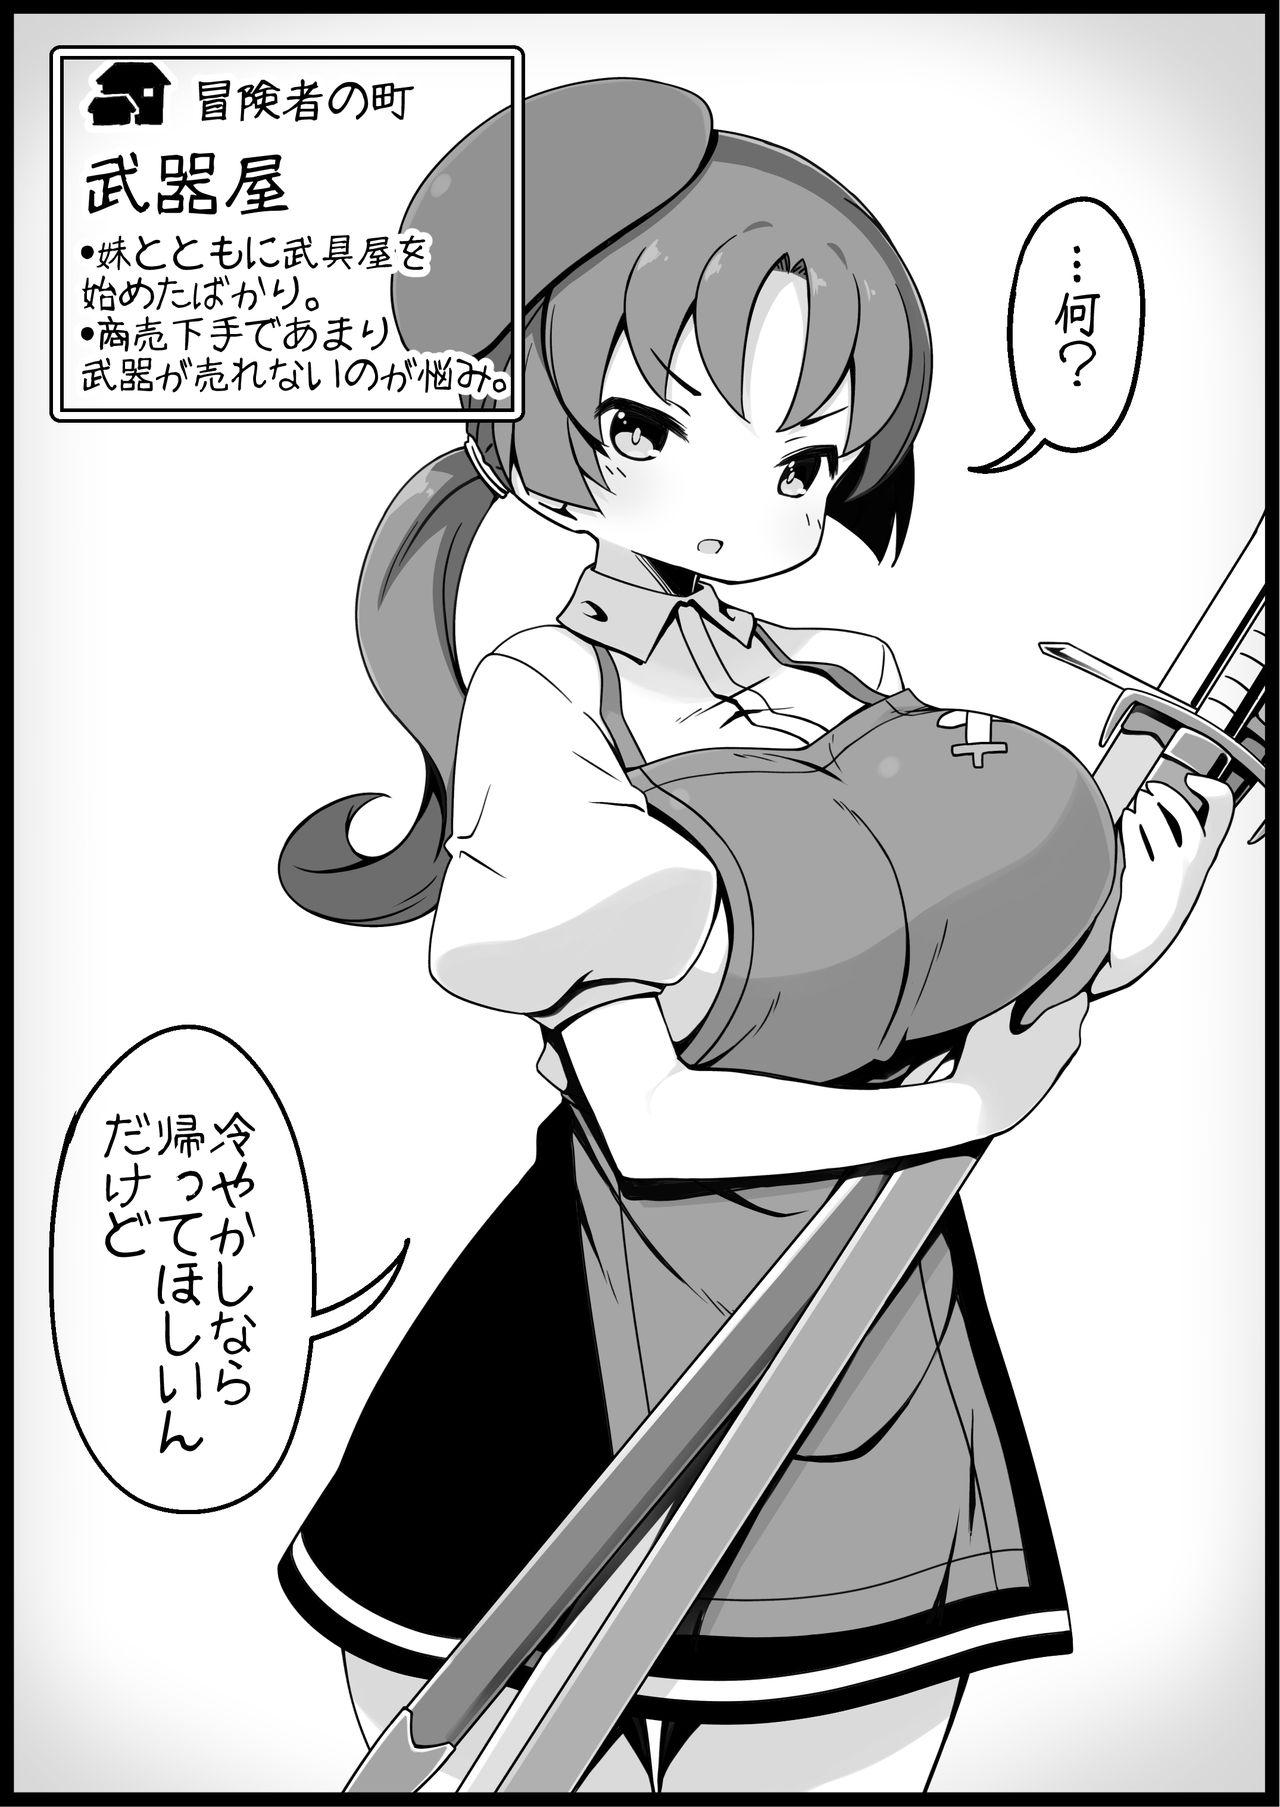 [Succubus Egg] Fantasy World 2 Too Forgiving to Heroes-Continued NPC (mob) Opponent-Centered Short H Manga Collection- 3